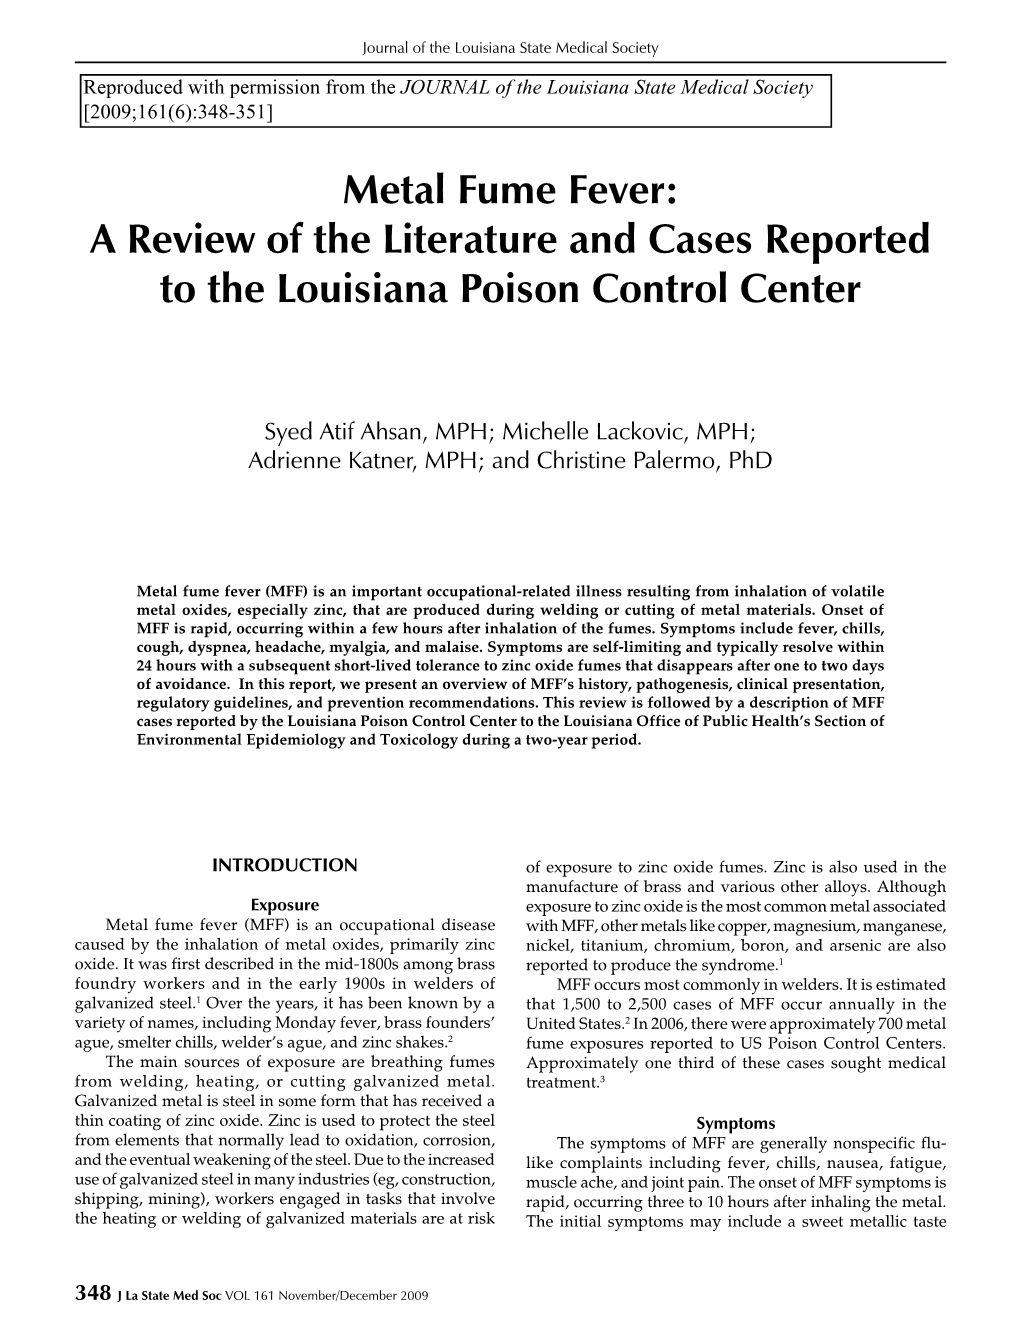 Metal Fume Fever: a Review of the Literature and Cases Reported to the Louisiana Poison Control Center